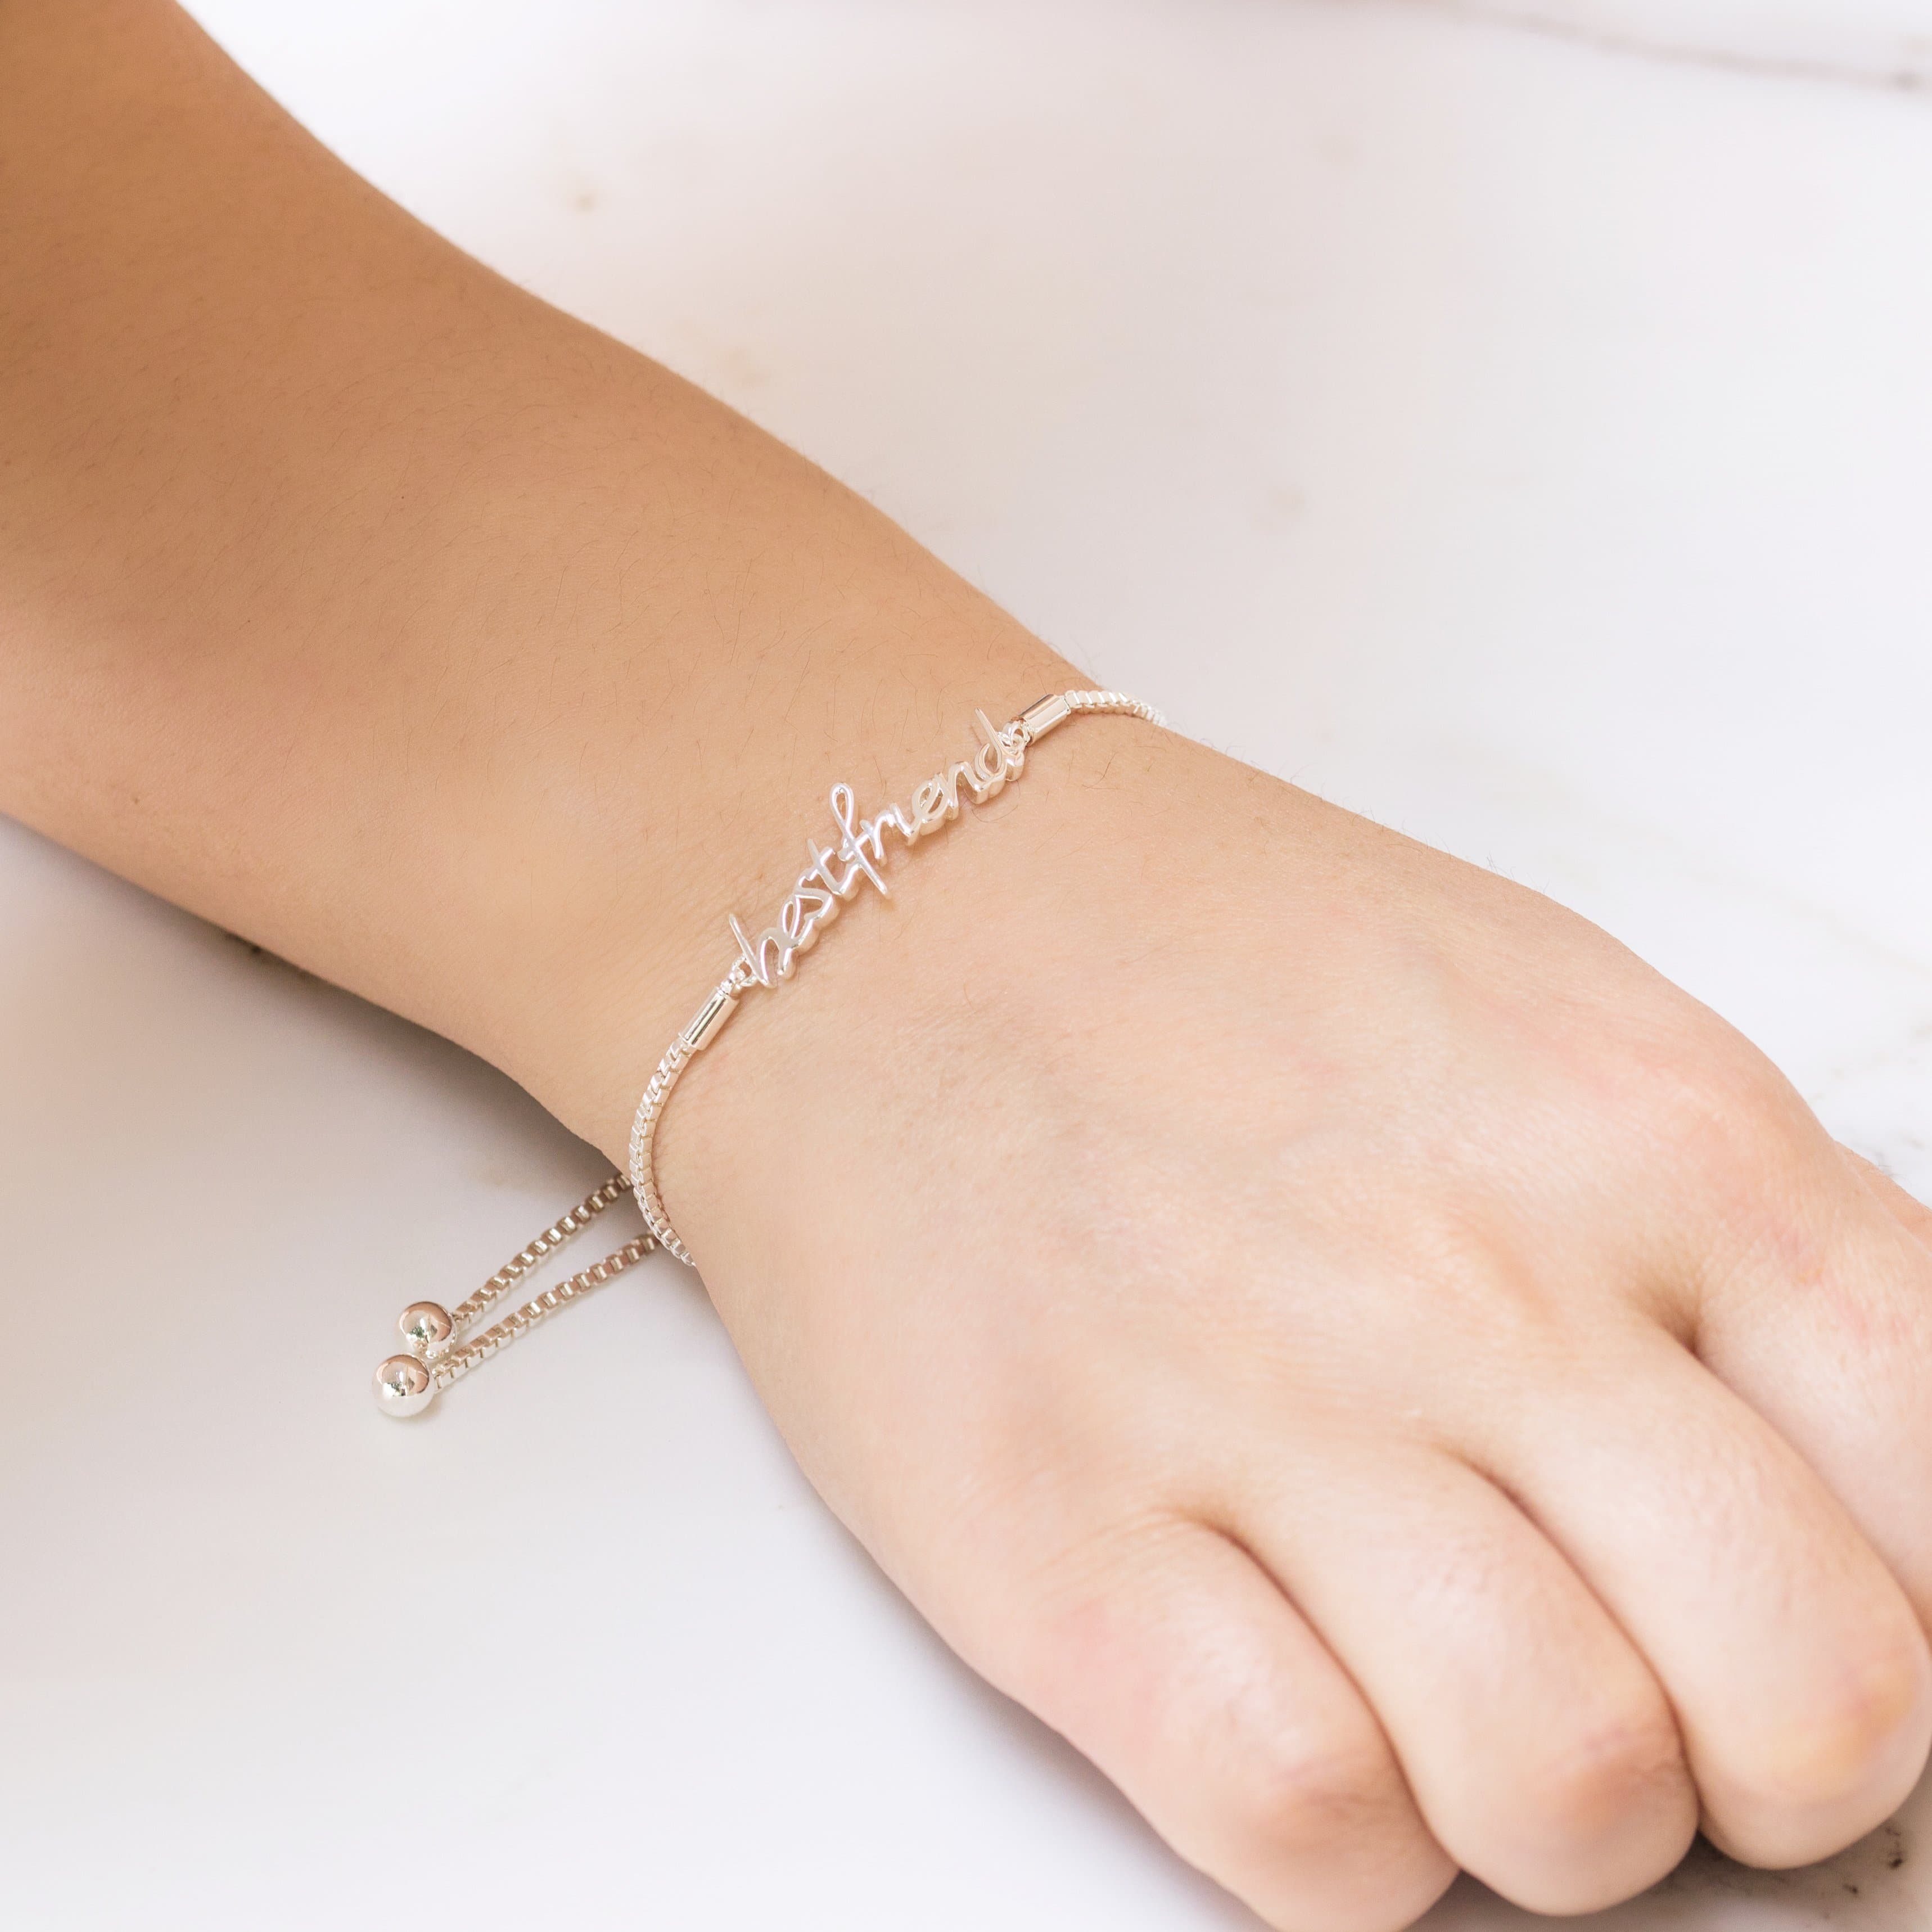 Silver Plated Best Friend Bracelet Created with Zircondia® Crystals